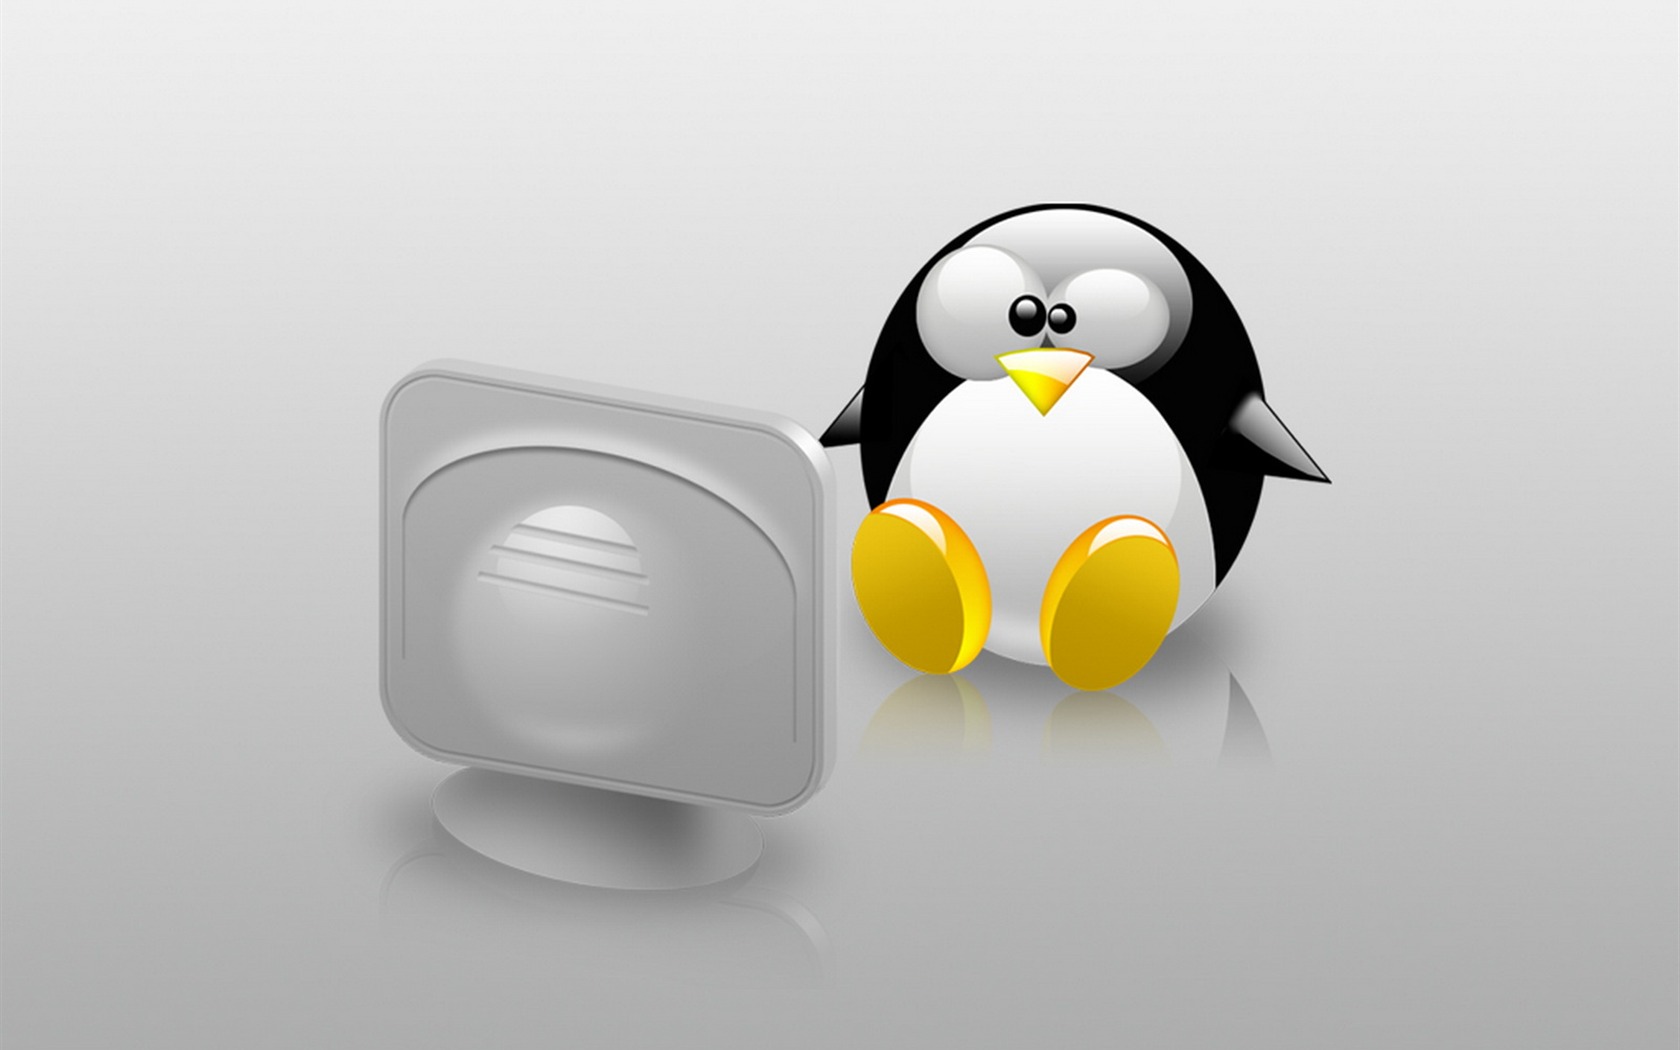 Linux tapety (3) #13 - 1680x1050